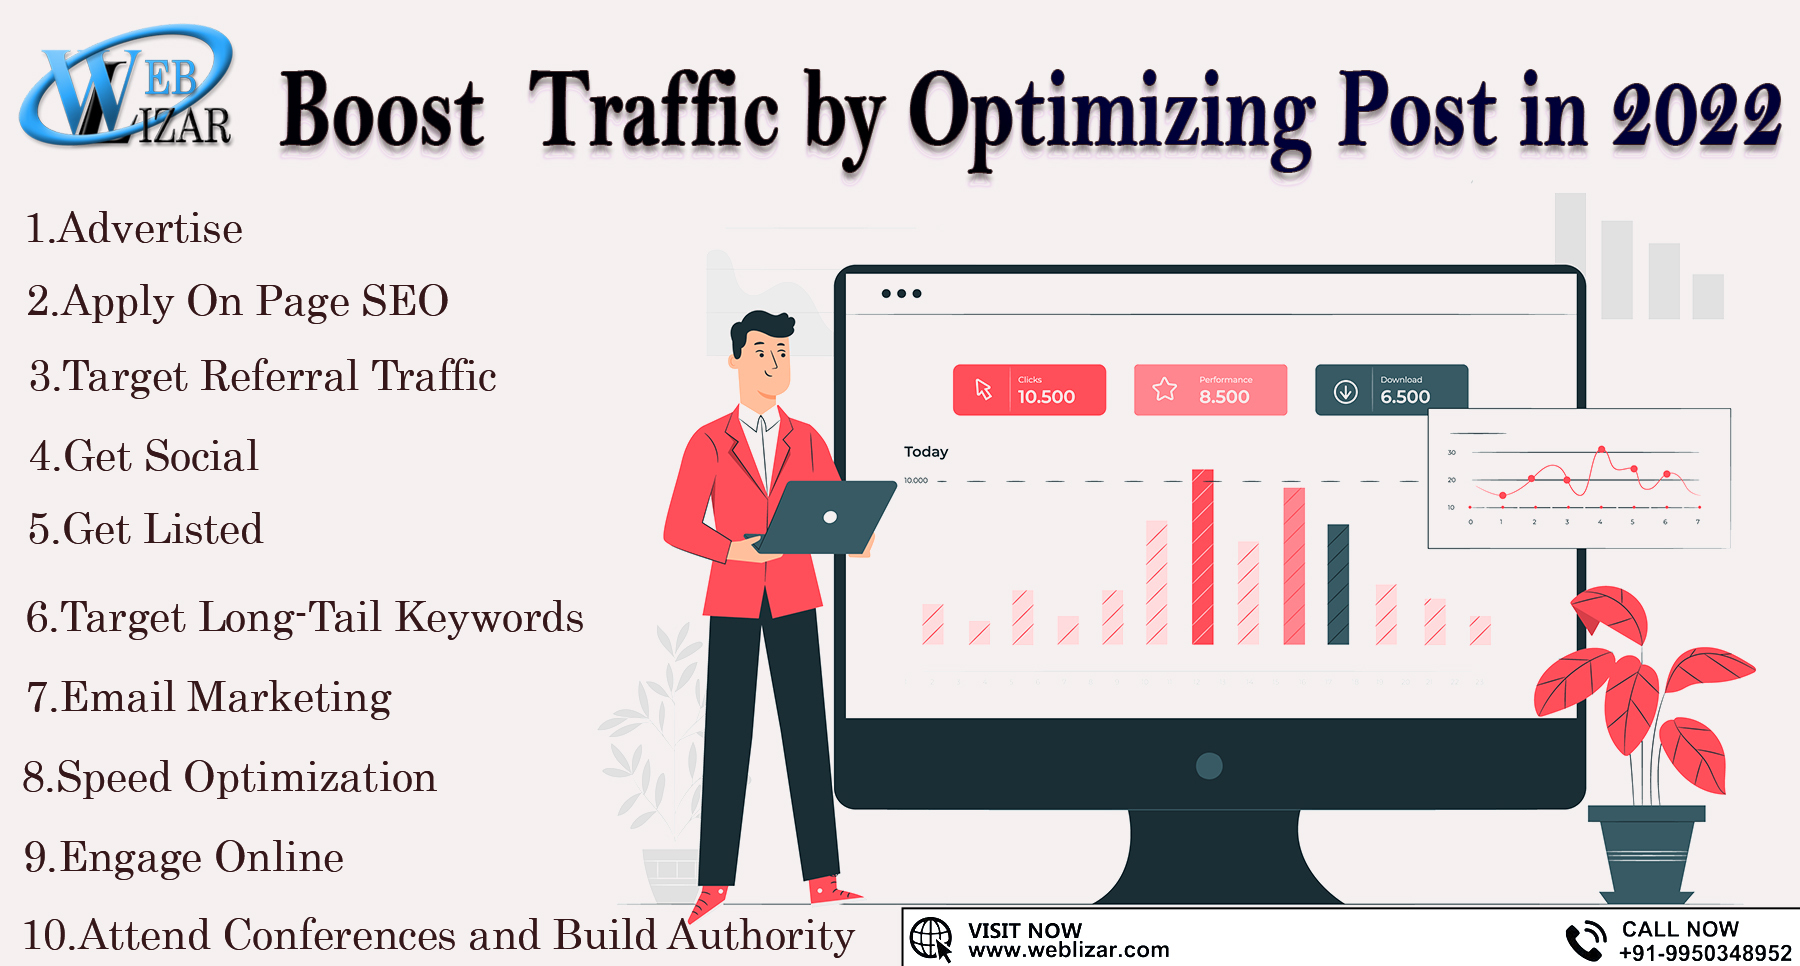 Boost Website Traffic by Optimizing Posts in 2022